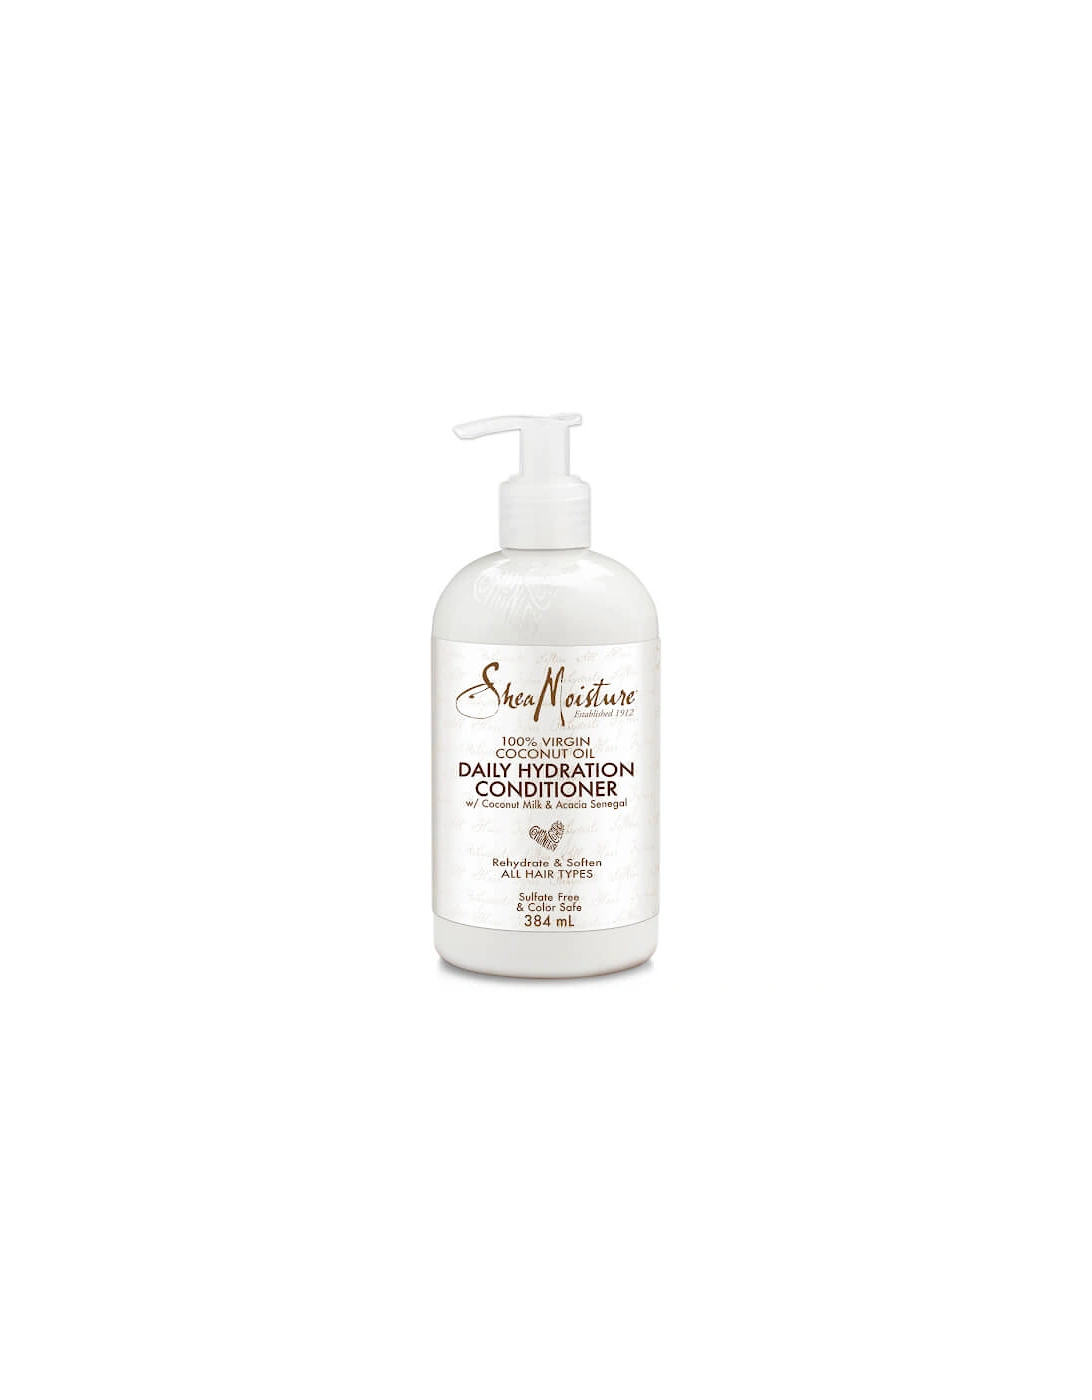 100% Virgin Coconut Oil Daily Hydration Conditioner 384ml - SheaMoisture, 2 of 1